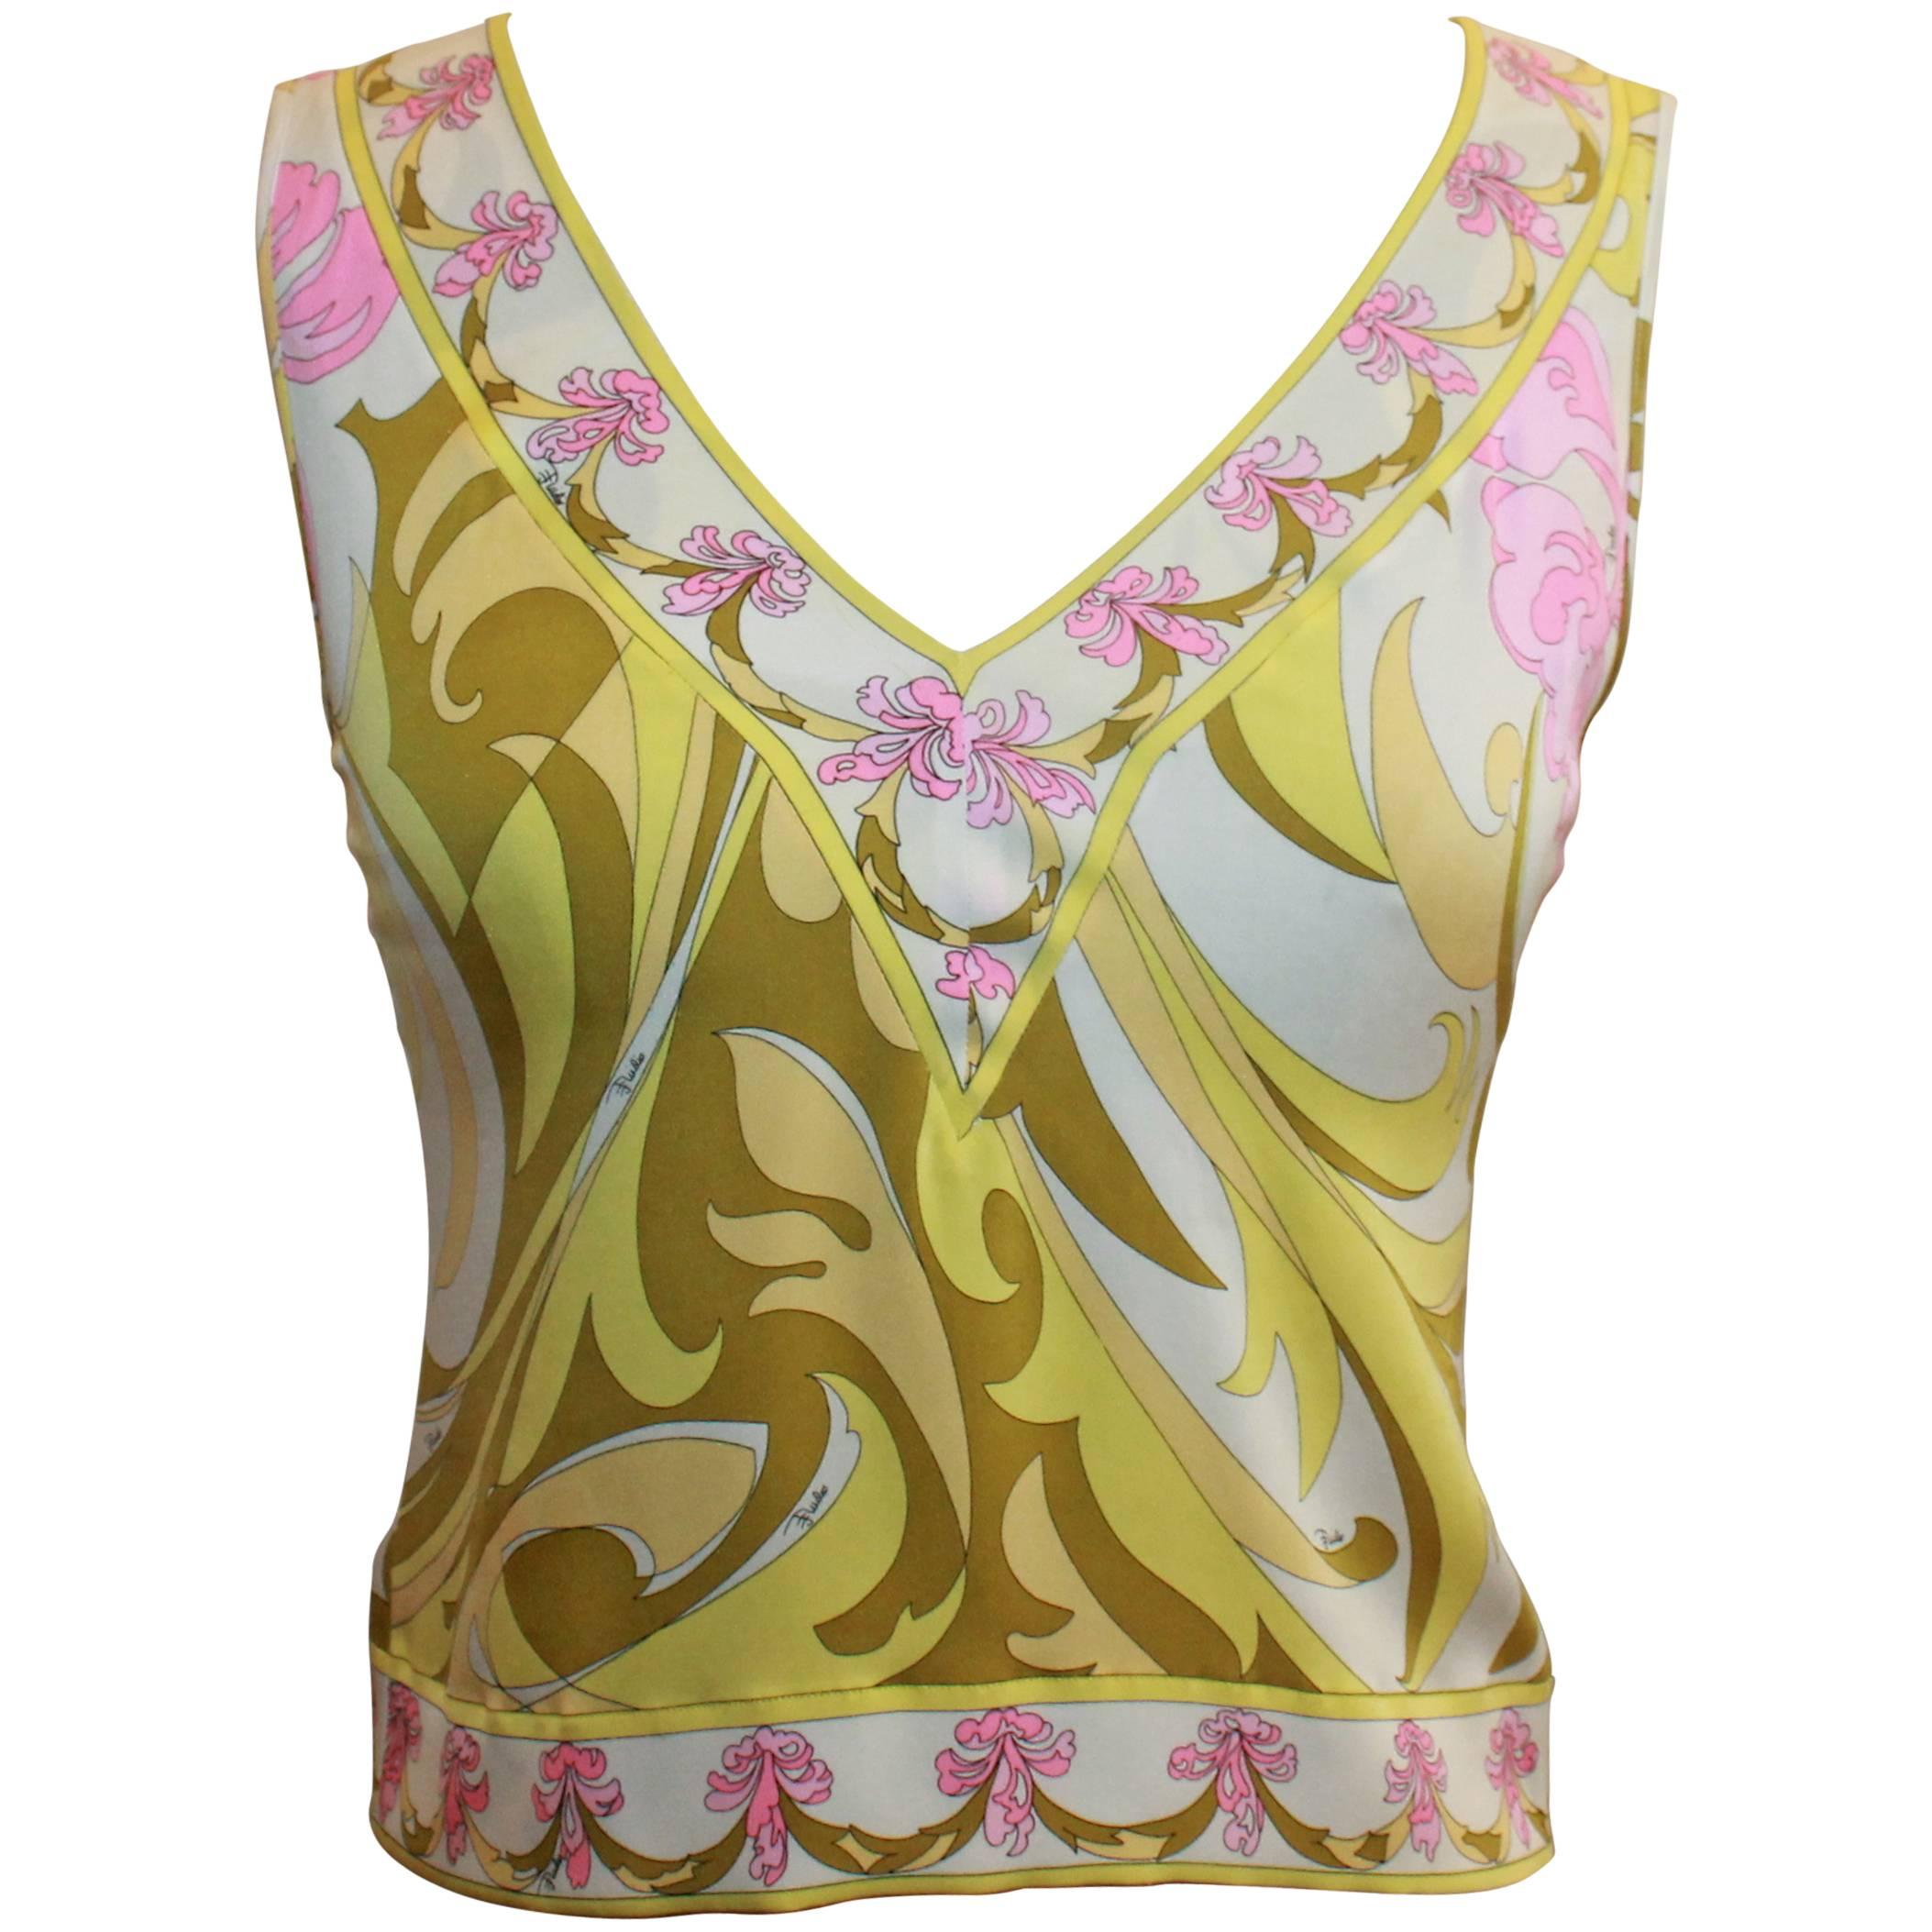 Emilio Pucci Yellow, Green & Pink Printed Sleeveless Top - 4 - 1980's 